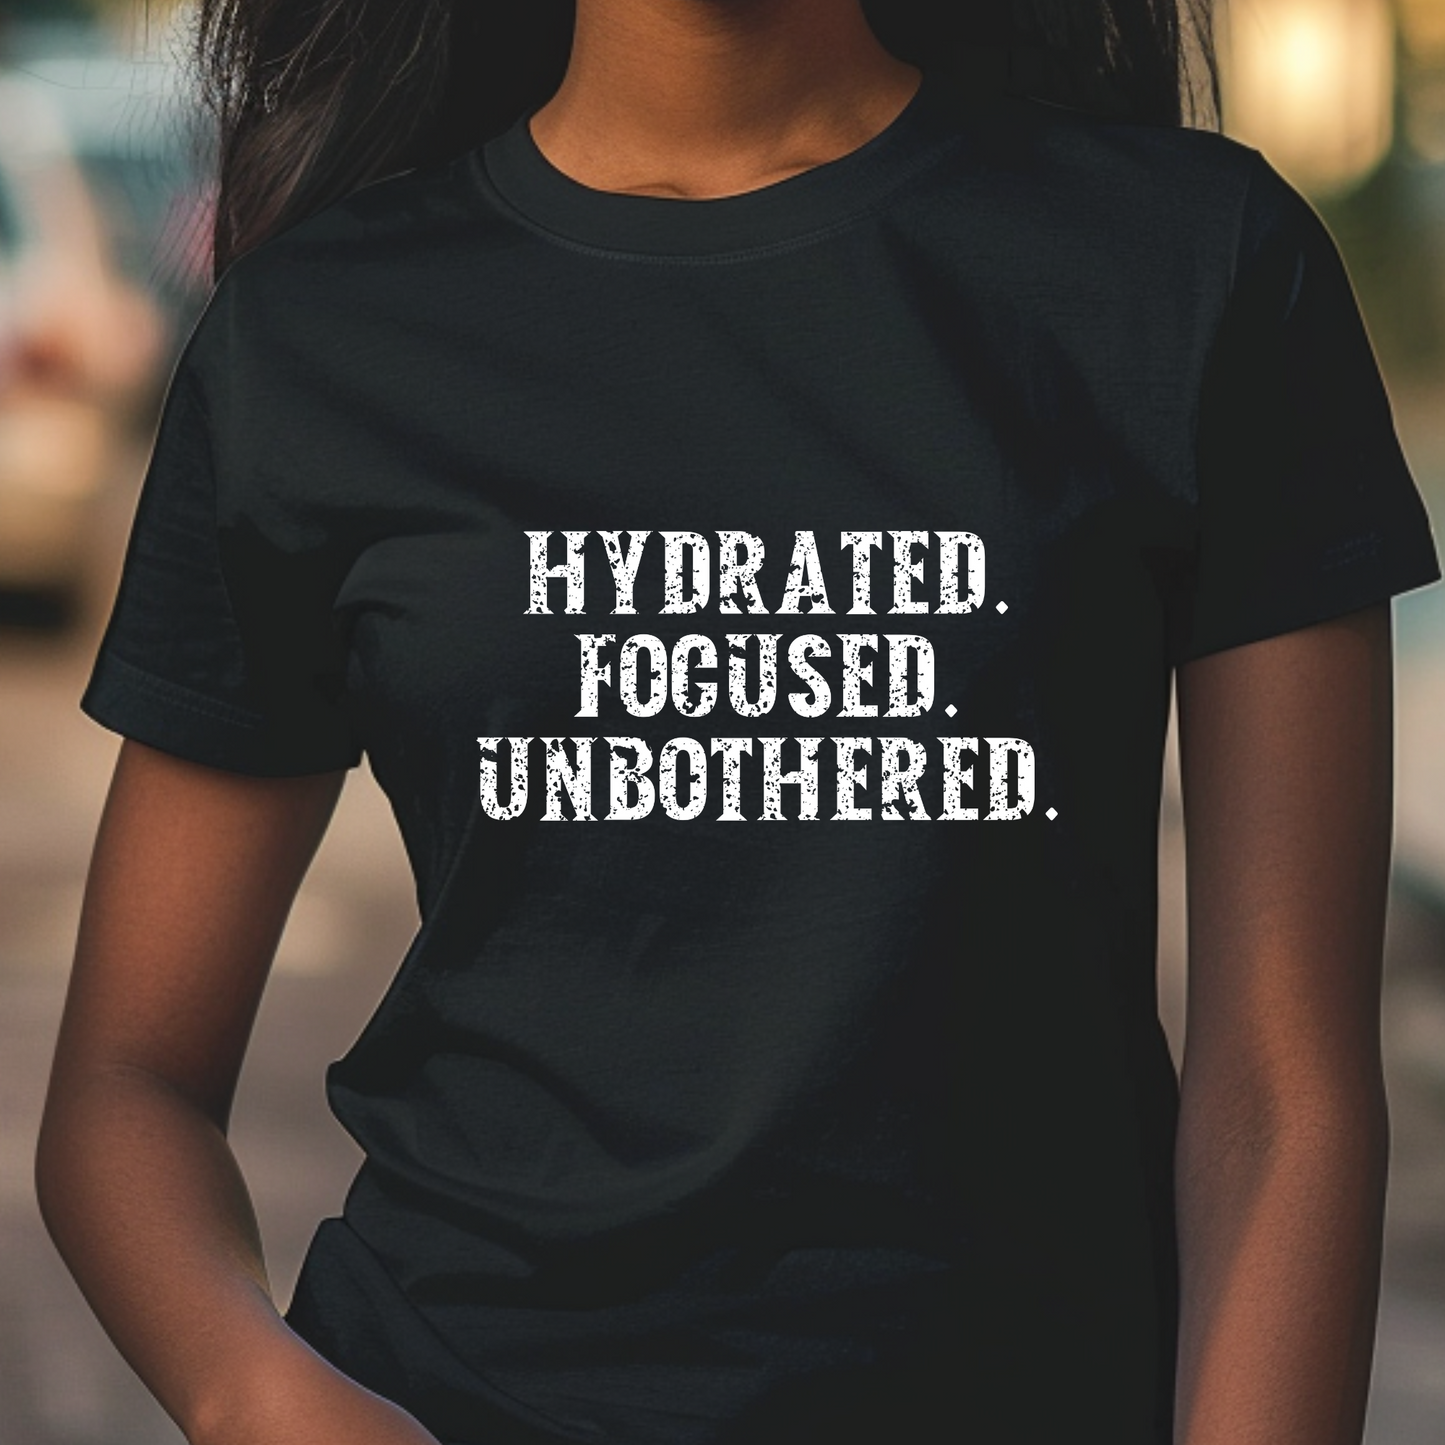 Hydrated - Focused - Unbothered Motivational T-Shirt